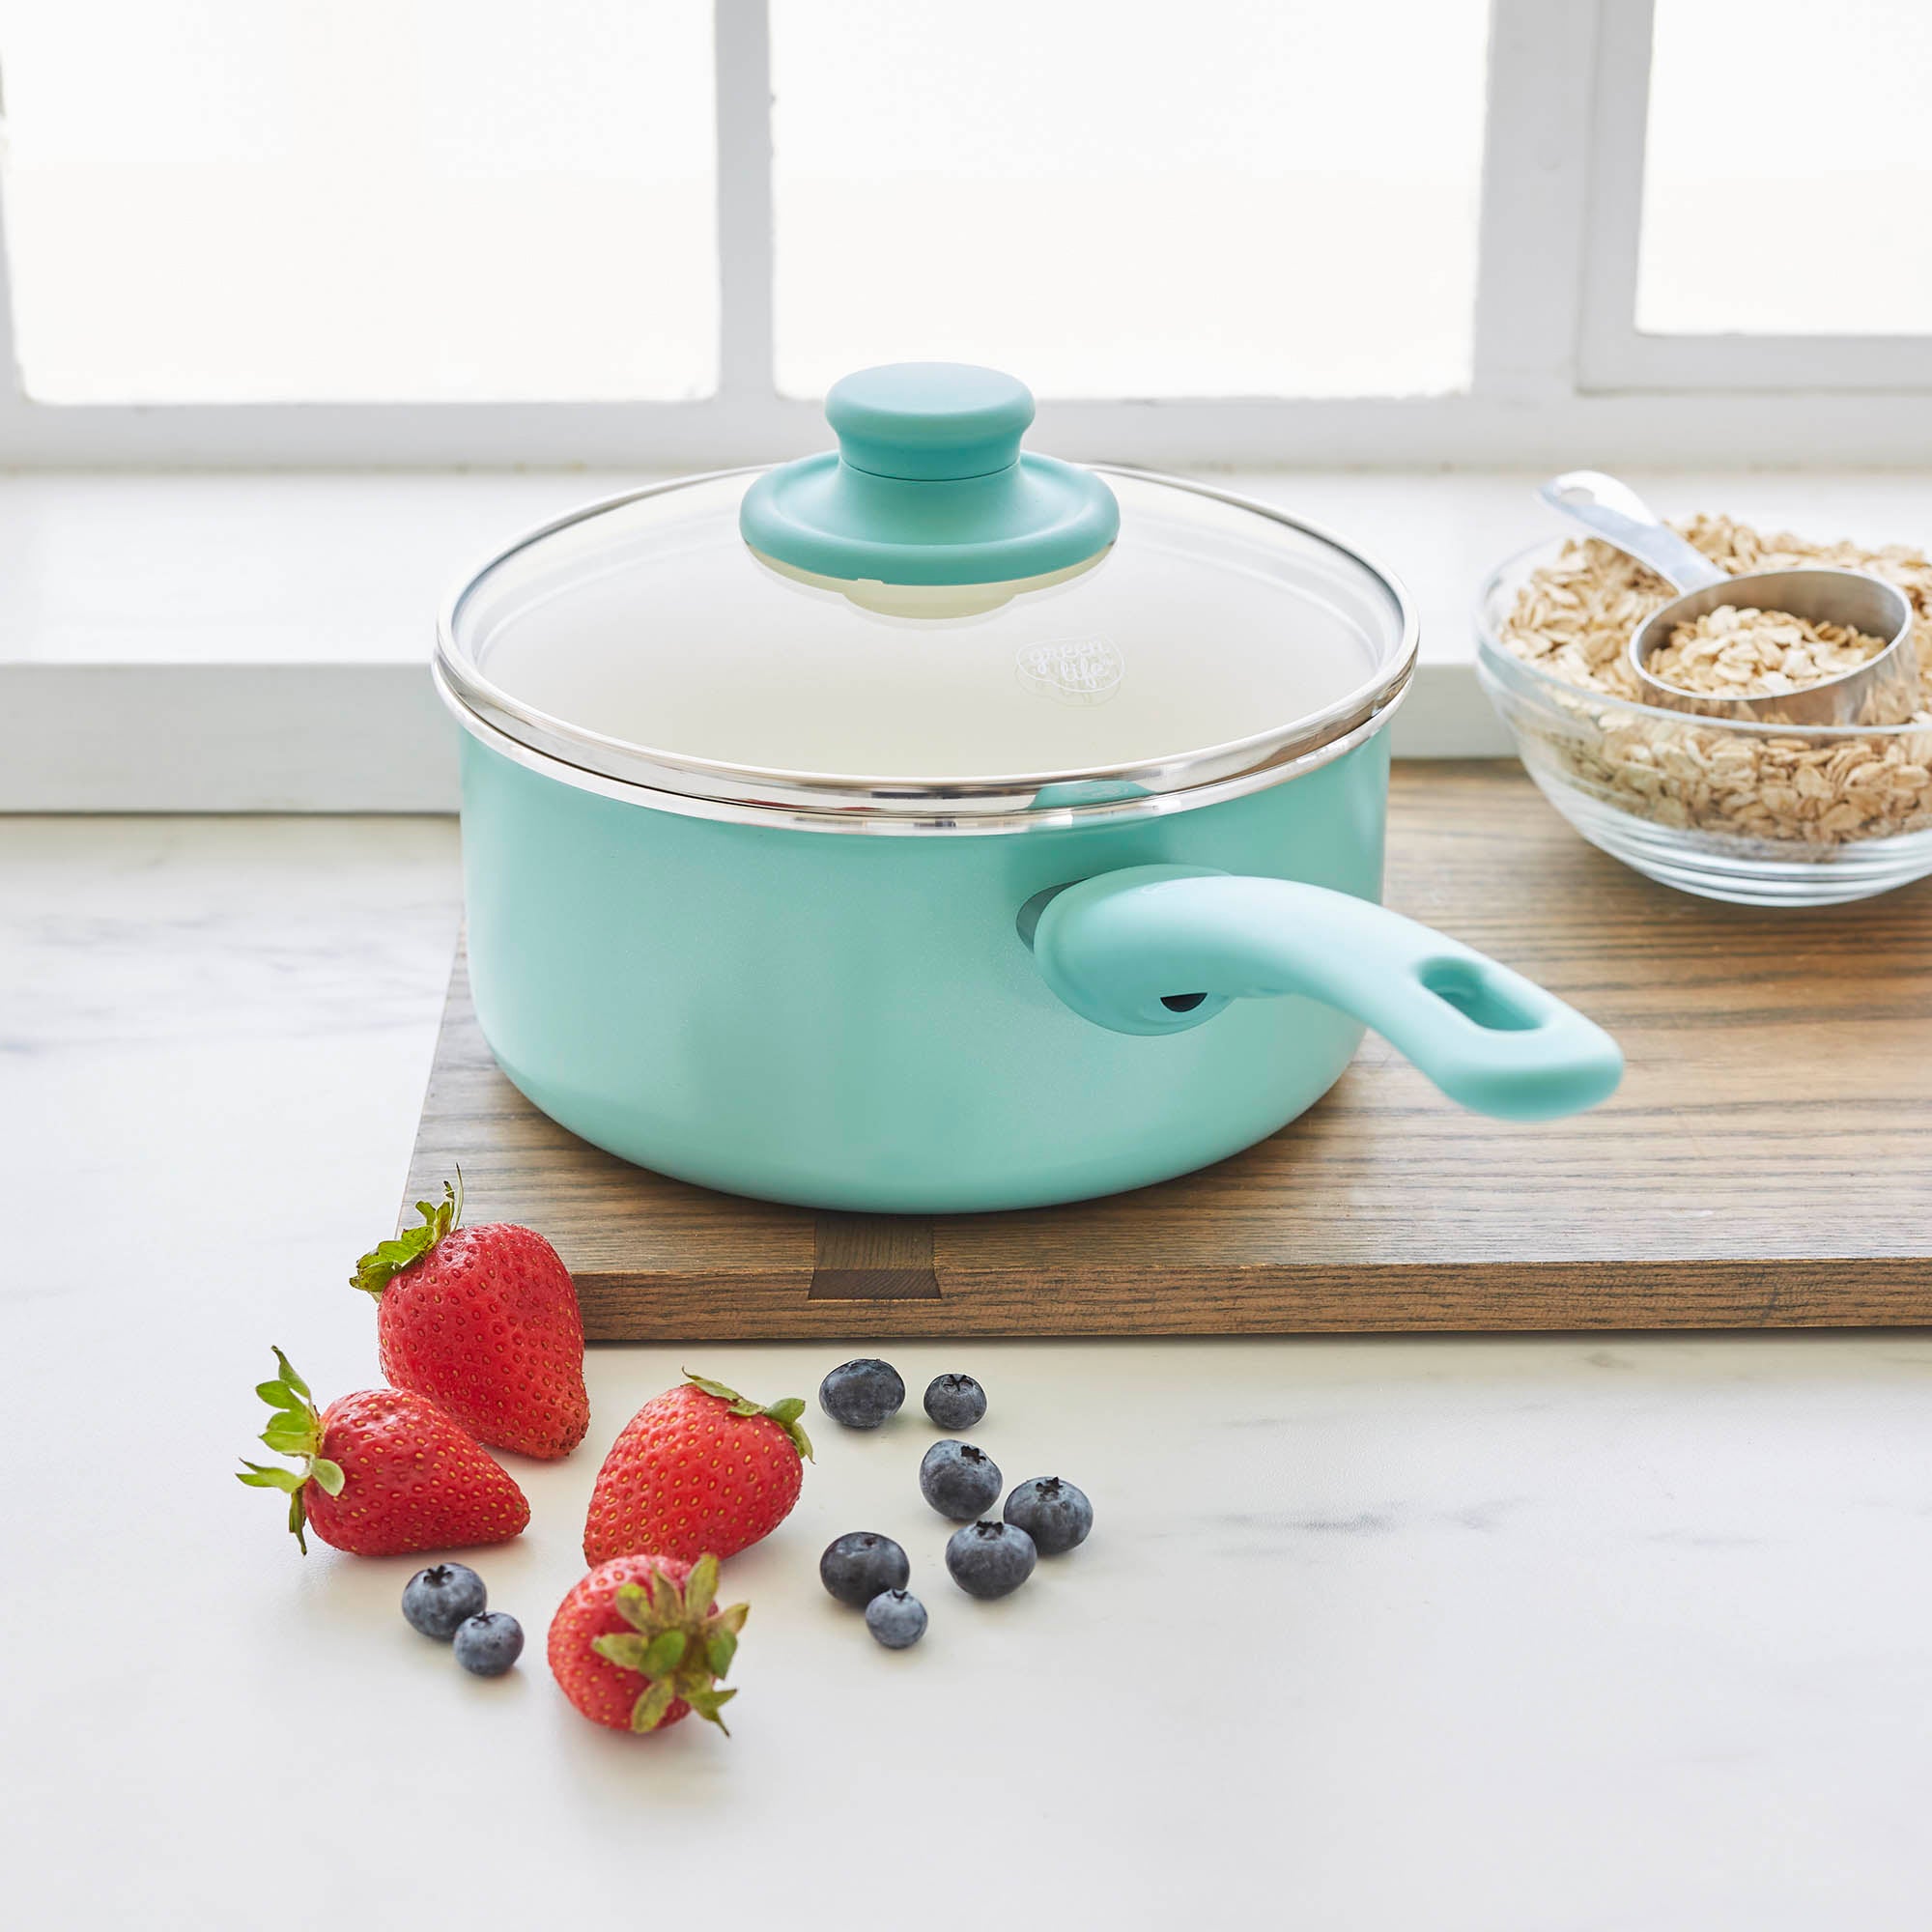 GreenLife cookware set available at Coles, Discover GreenLife Soft Grip  collection at Coles ! Get a grip - literally! GreenLife Soft Grip cookware  features ergonomic, stay-cool handles that make, By GreenPan